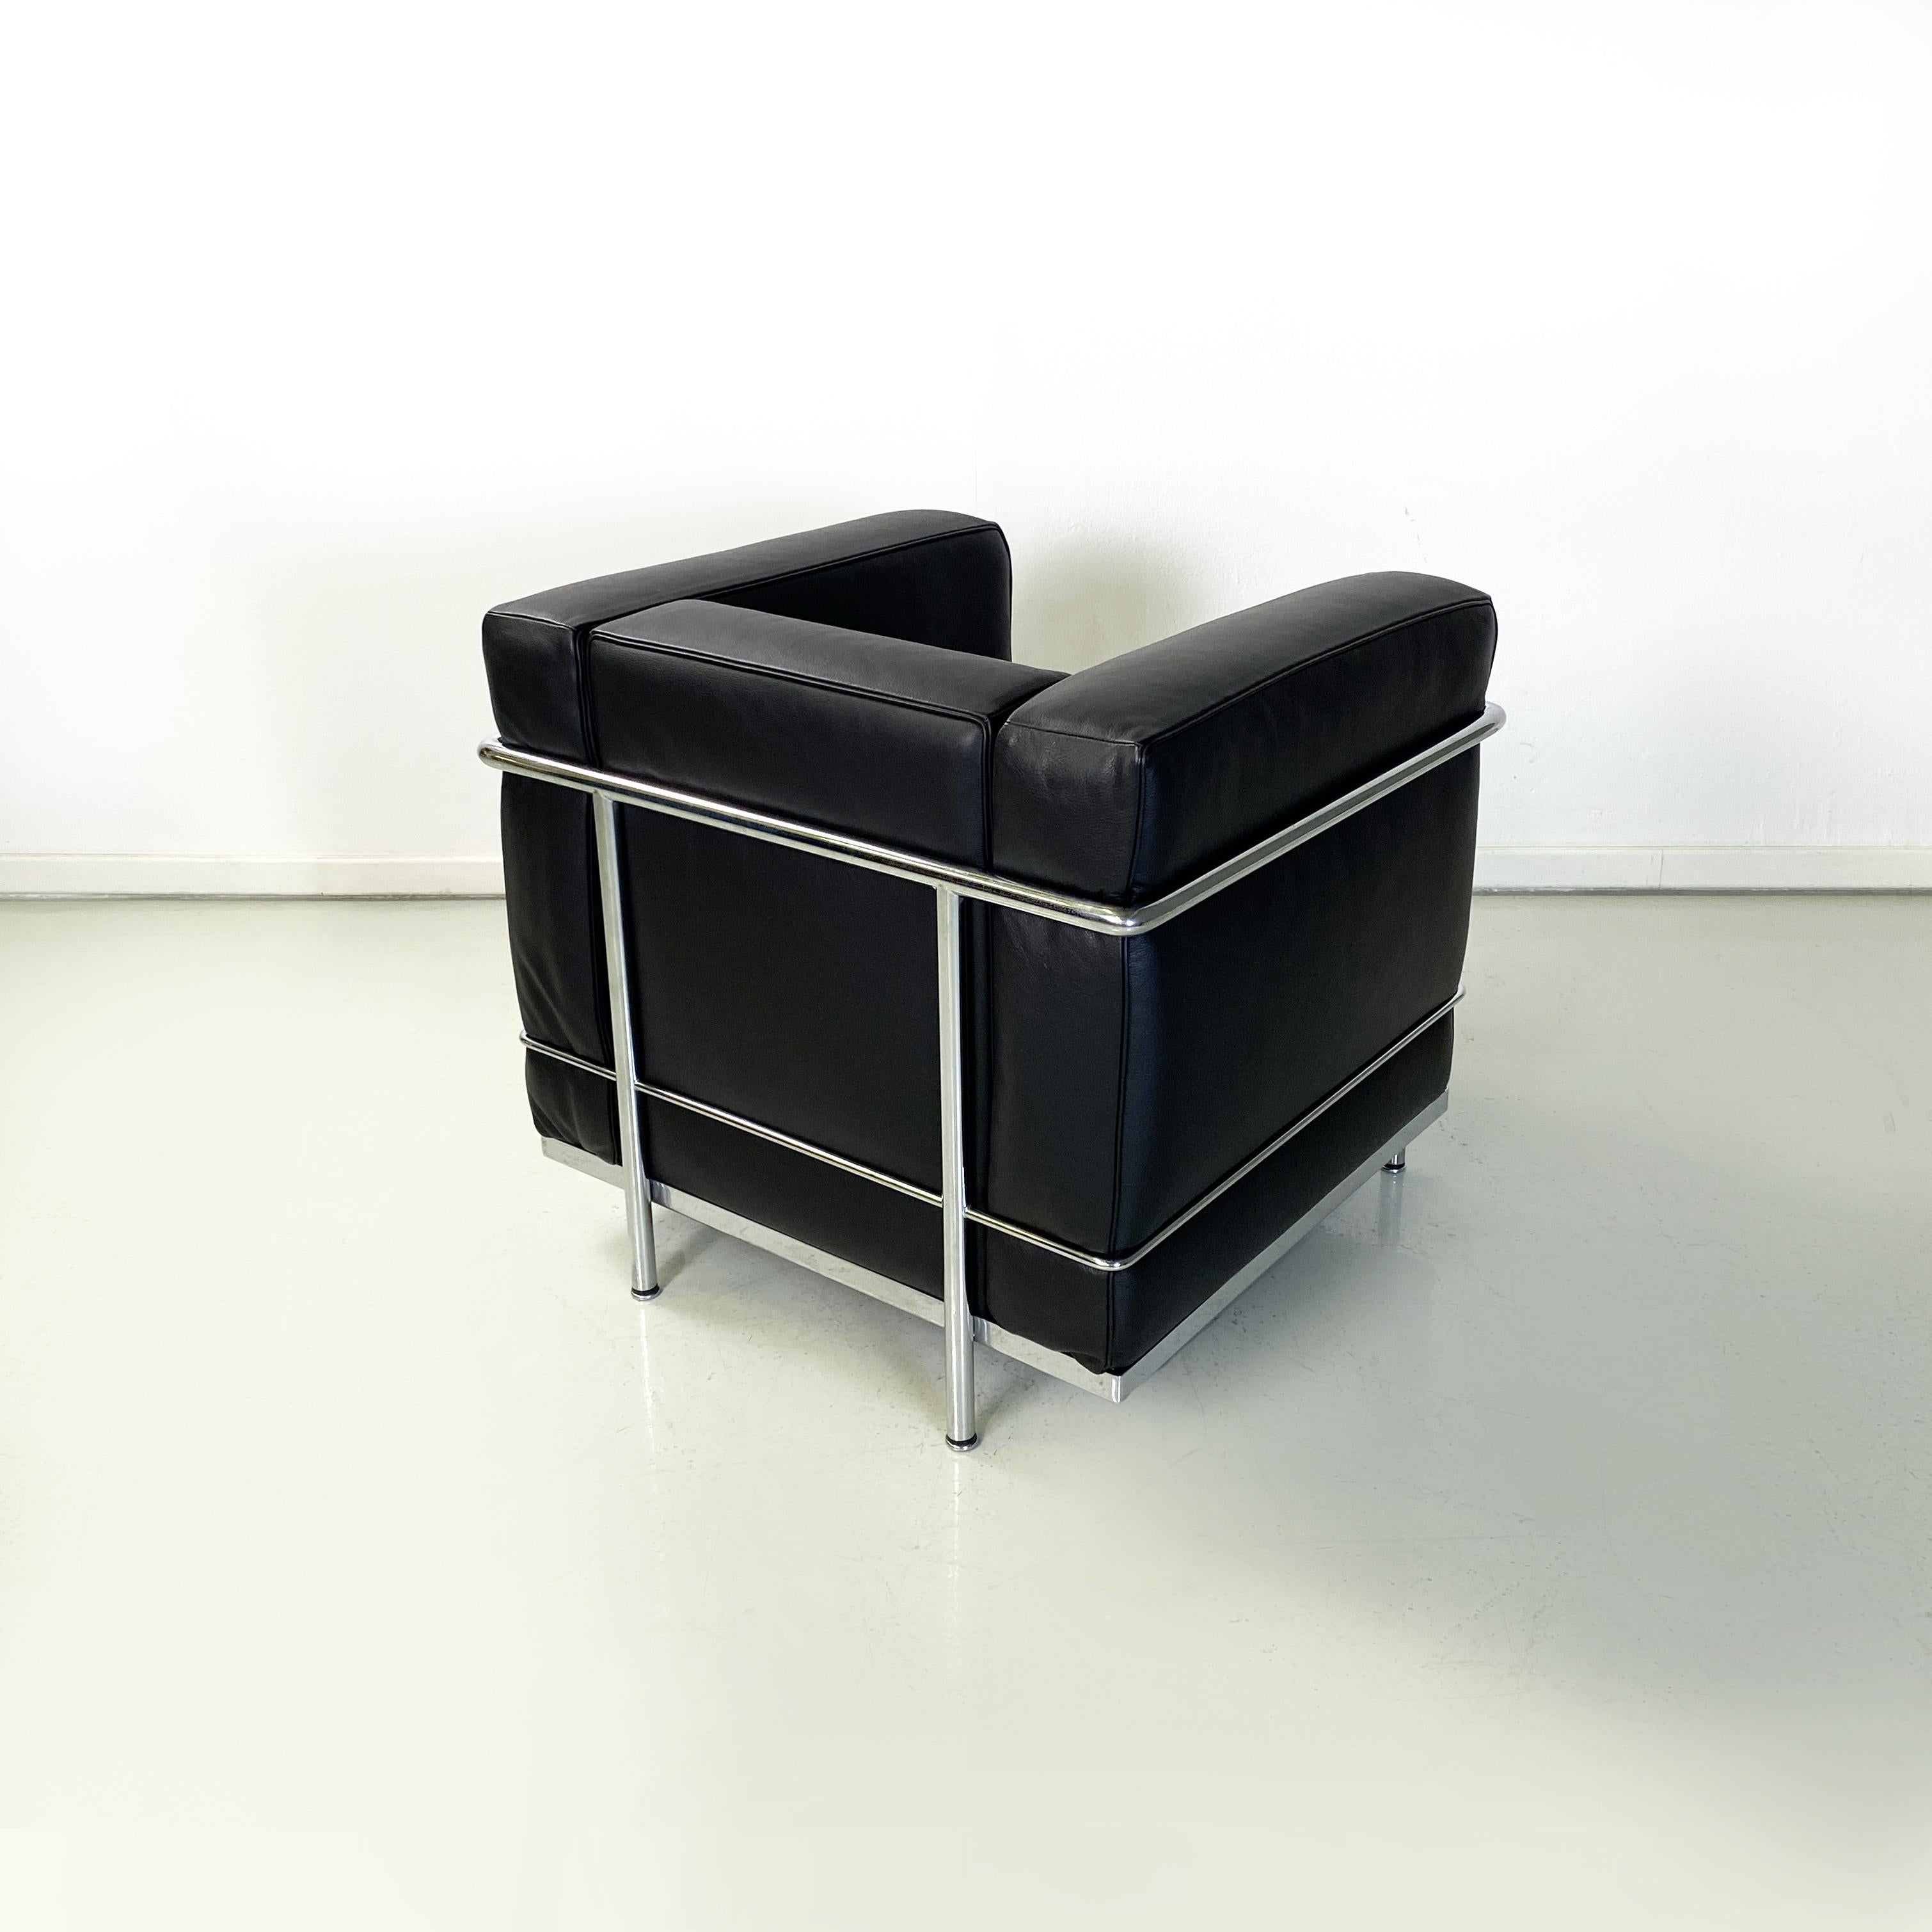 Late 20th Century Italian Modern Armchair LC3 Le Corbusier Jeanneret and Perriand for Cassina 1980